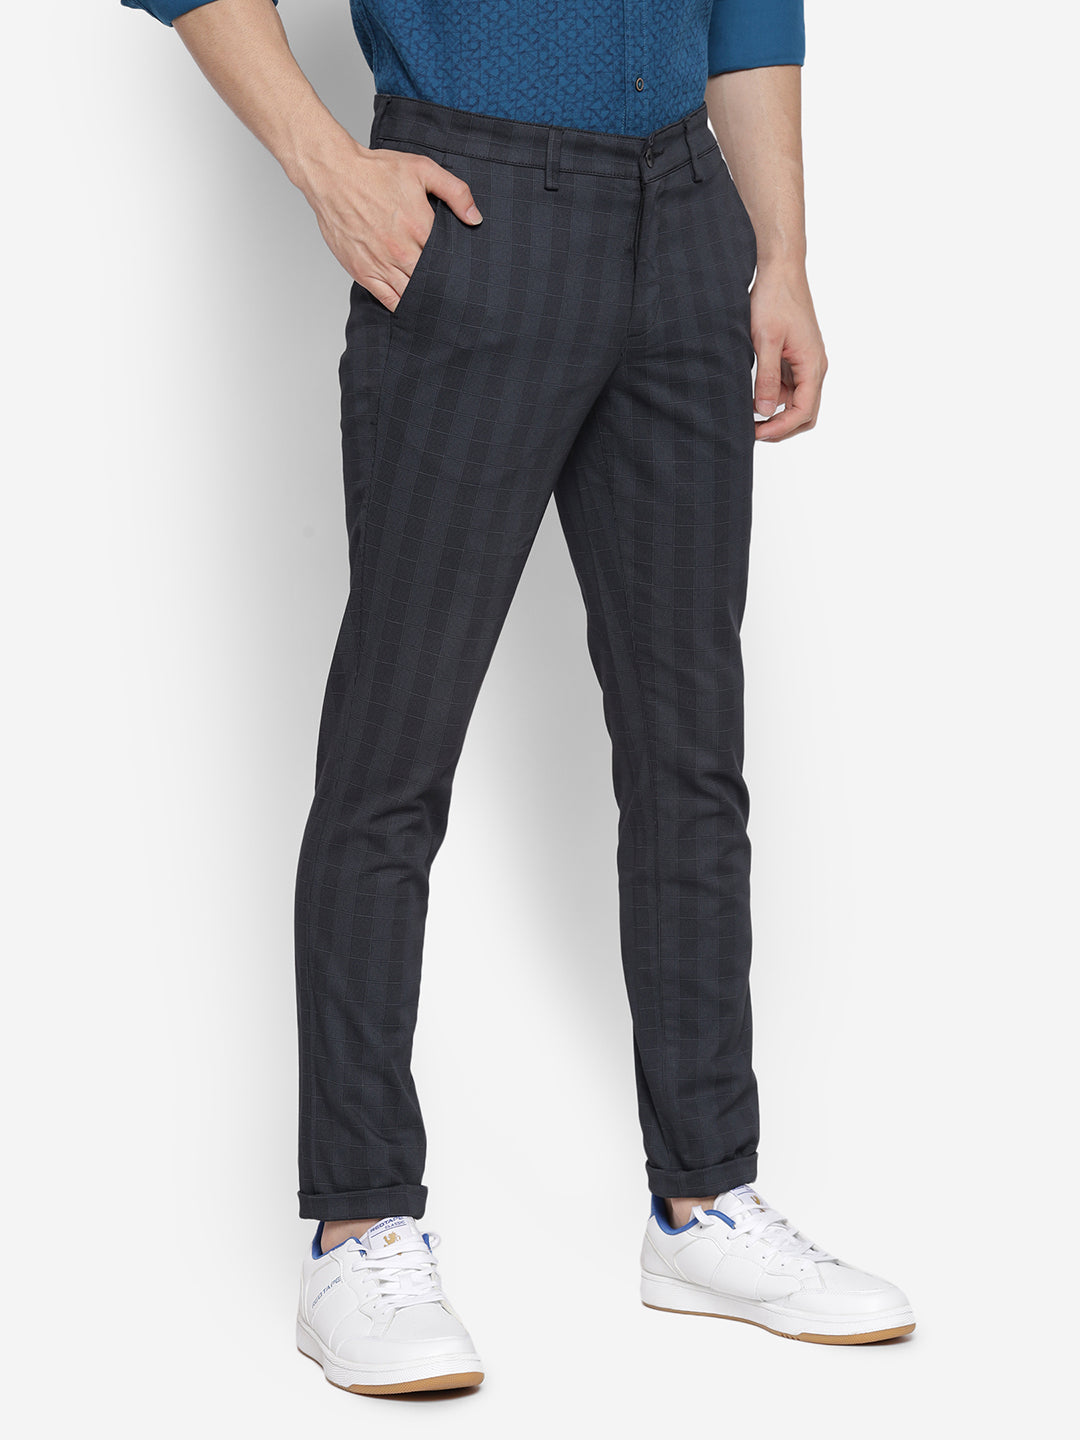 Checked Narrow Fit Causal Trouser